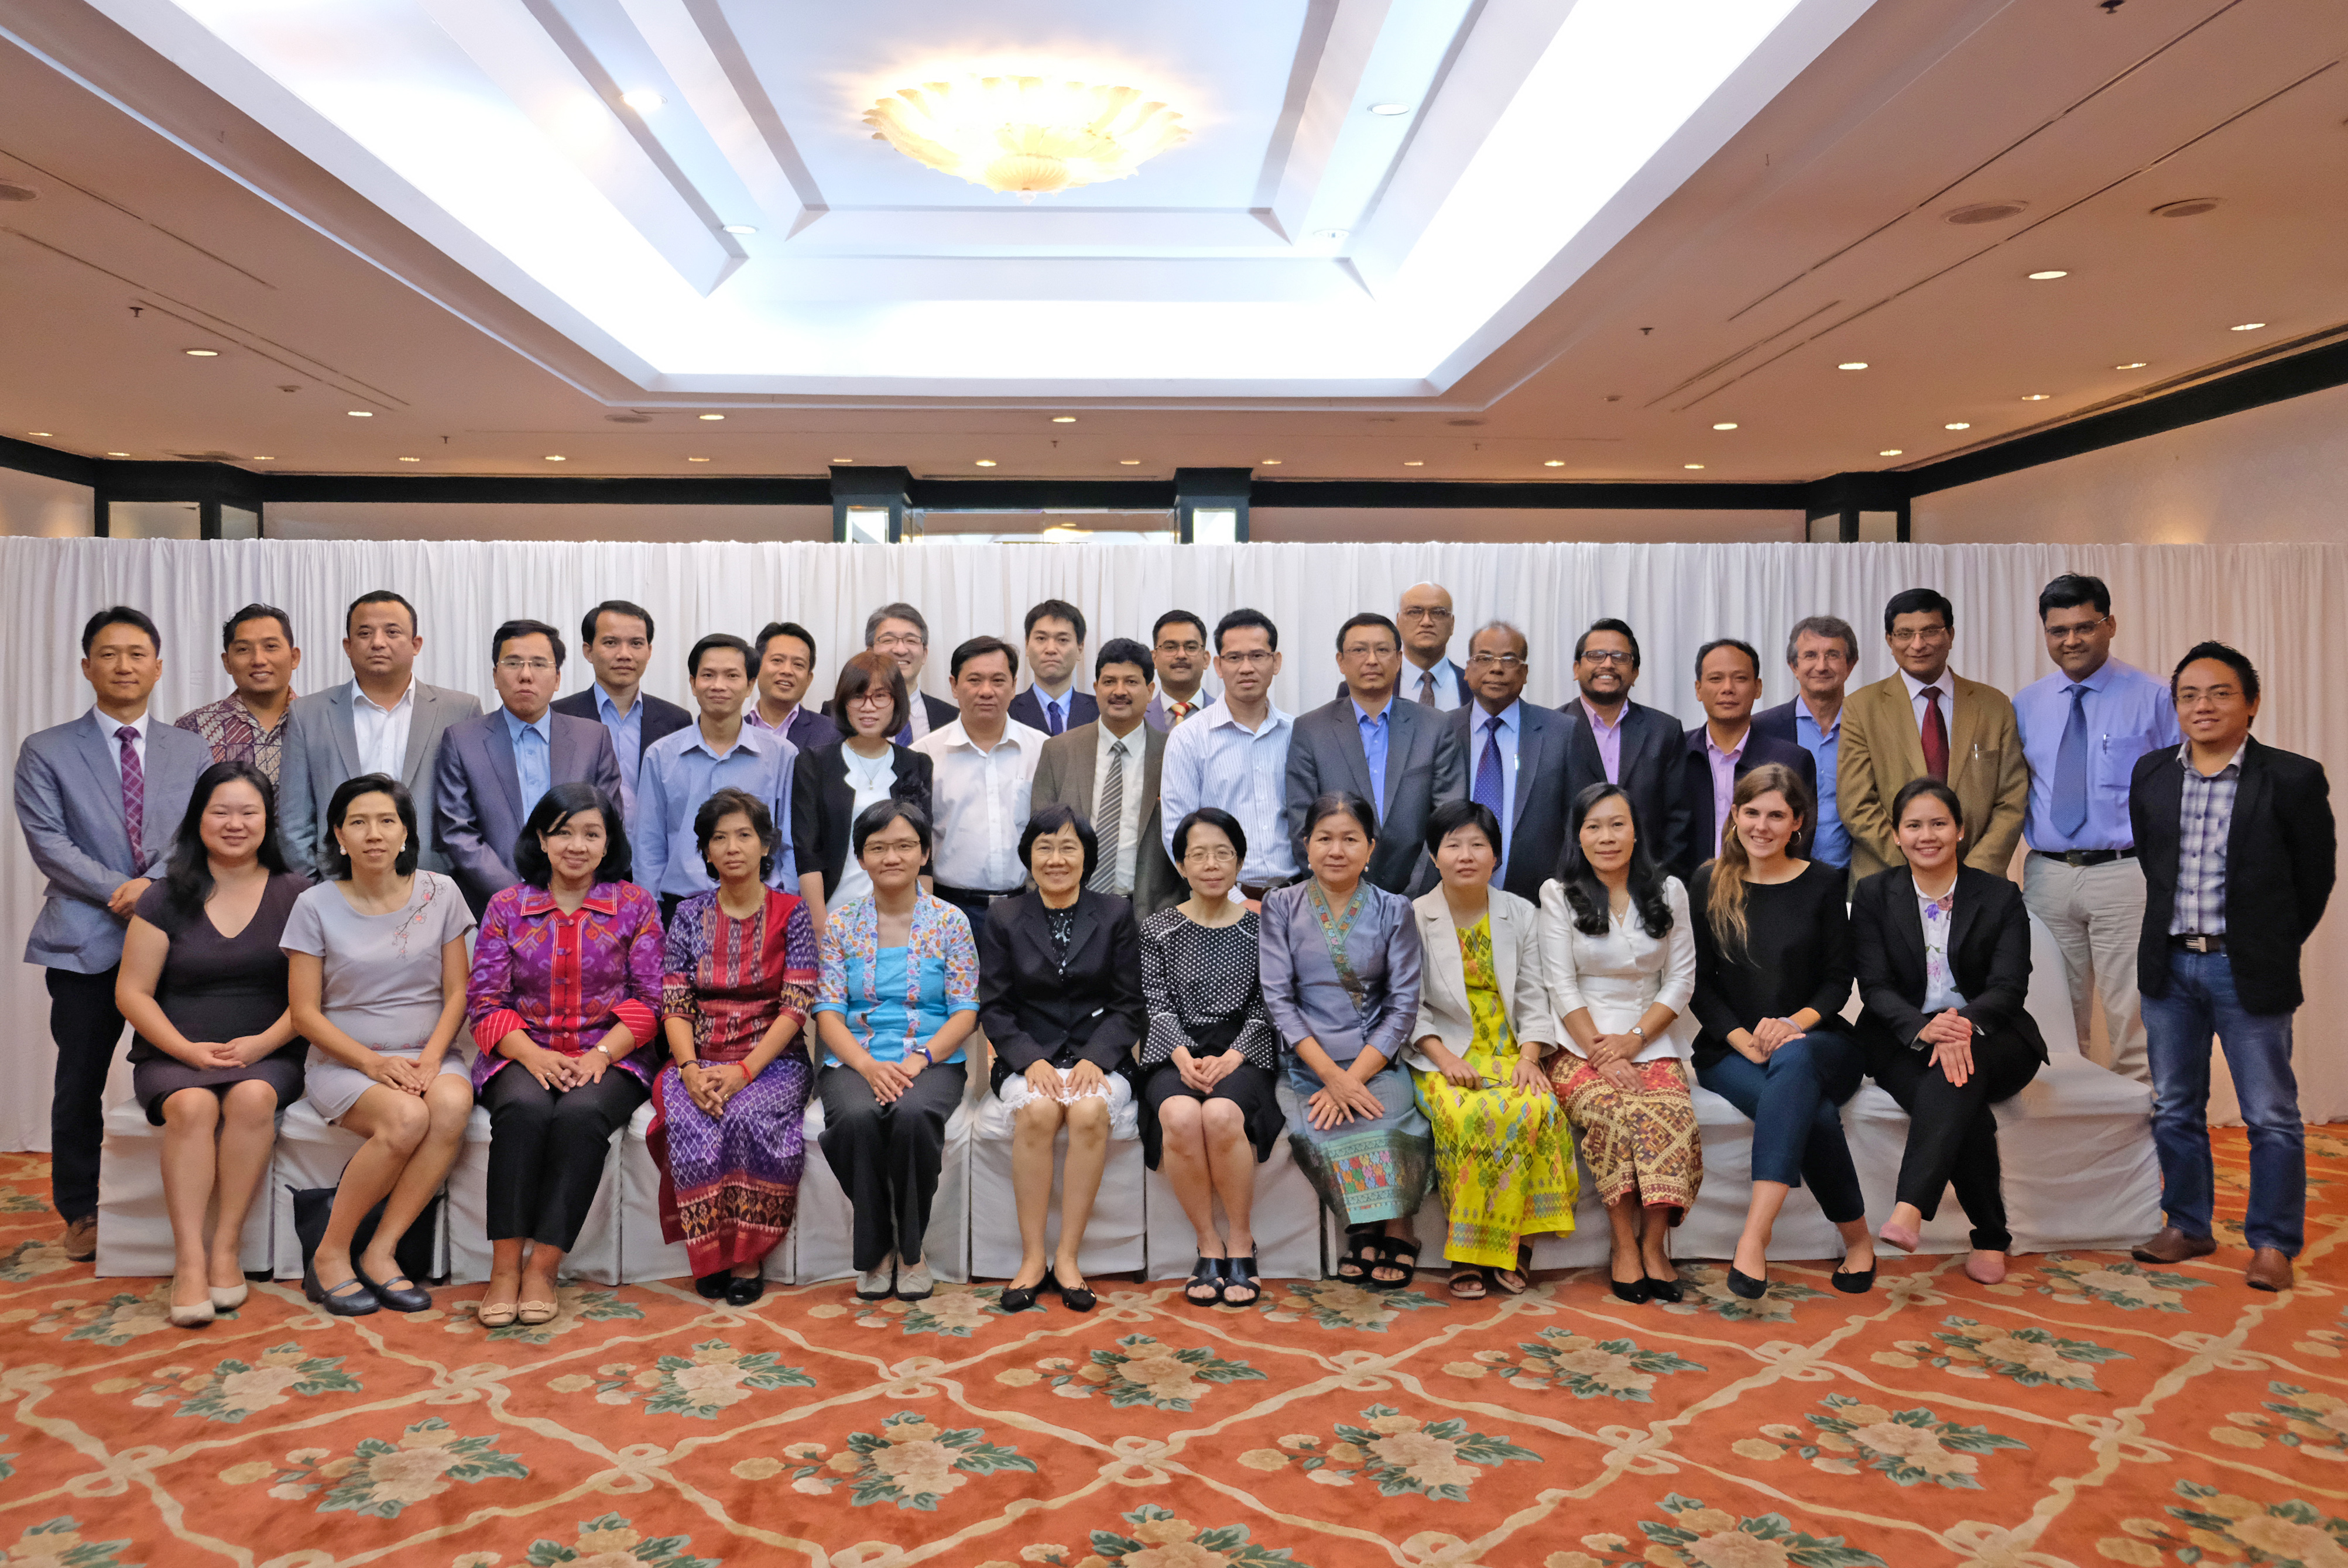 Participants at the physicians’ training workshop during December in Bangkok